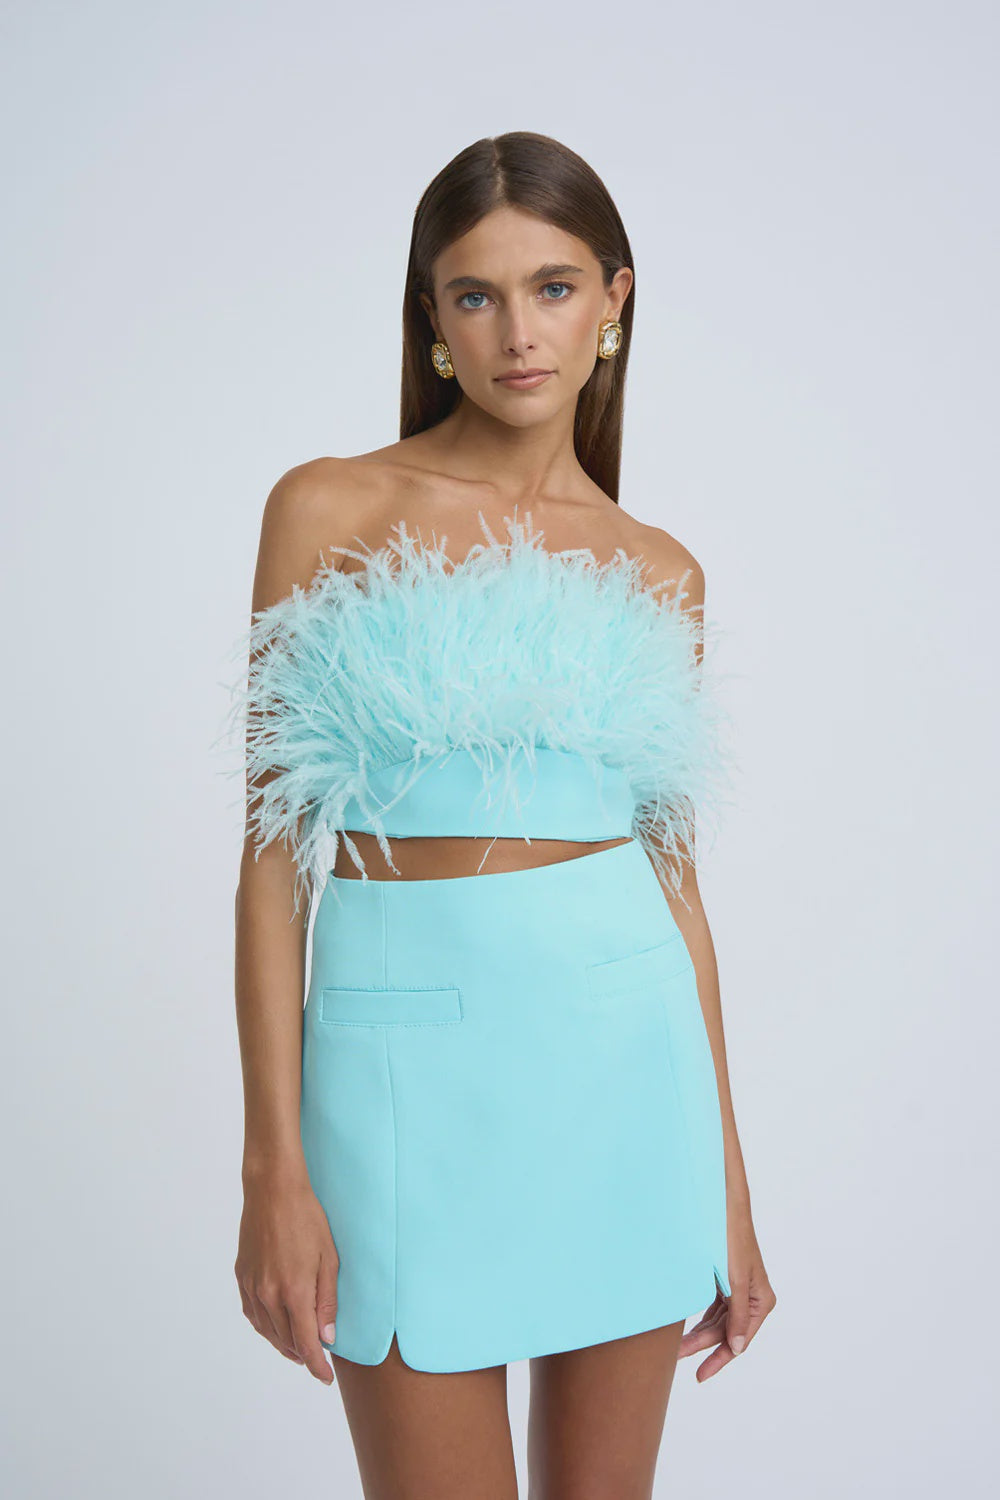 BY JOHNNY - FRANCESCA FEATHER BUSTIER ICE BLUE